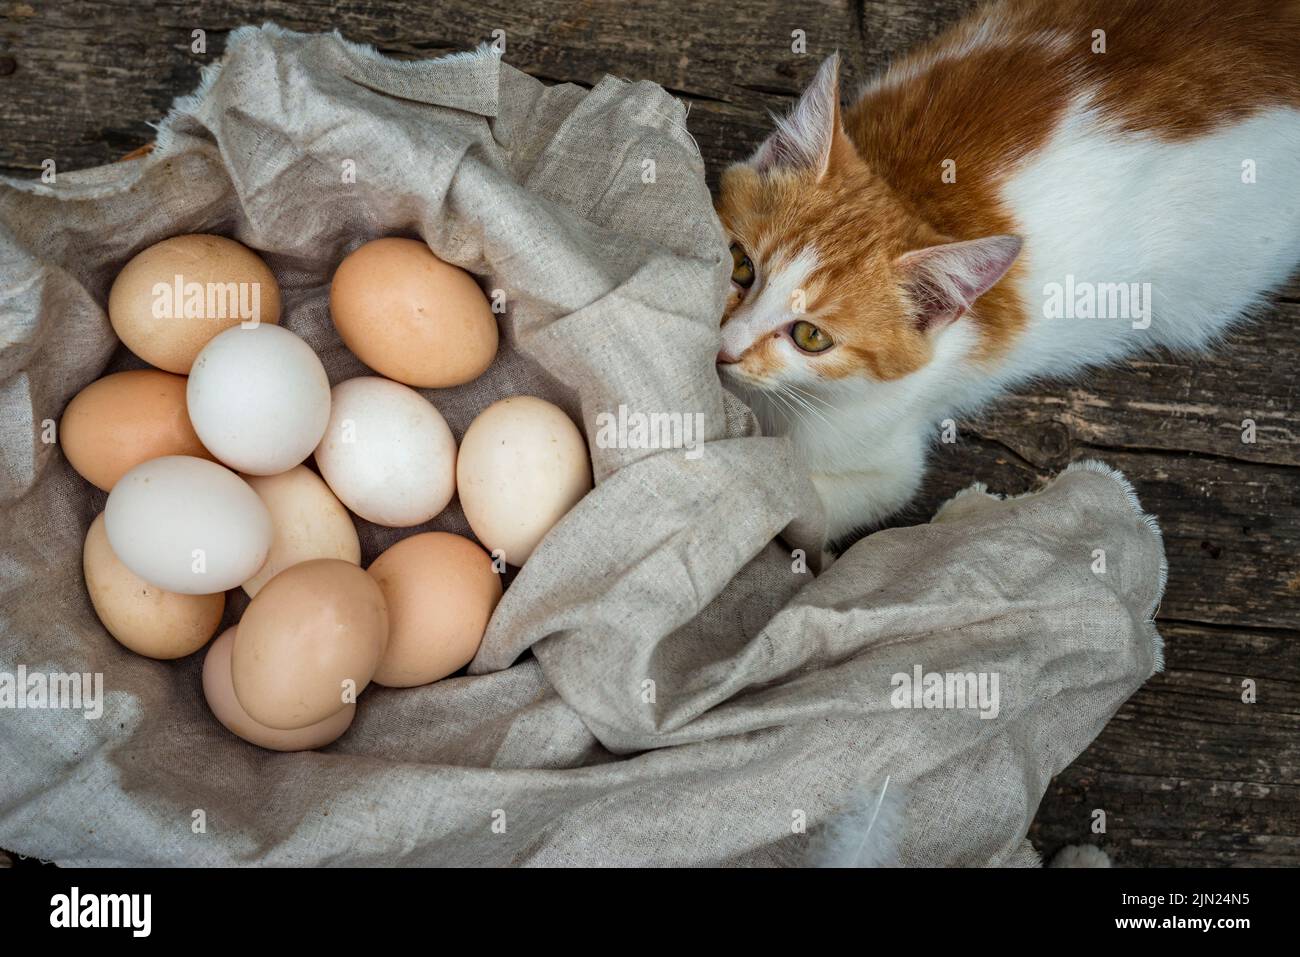 cat looking camera, organic eggs wooden table background Food Rustic Still Life sack bag wicker basket chicken feathers linen napkin countryside Inves Stock Photo